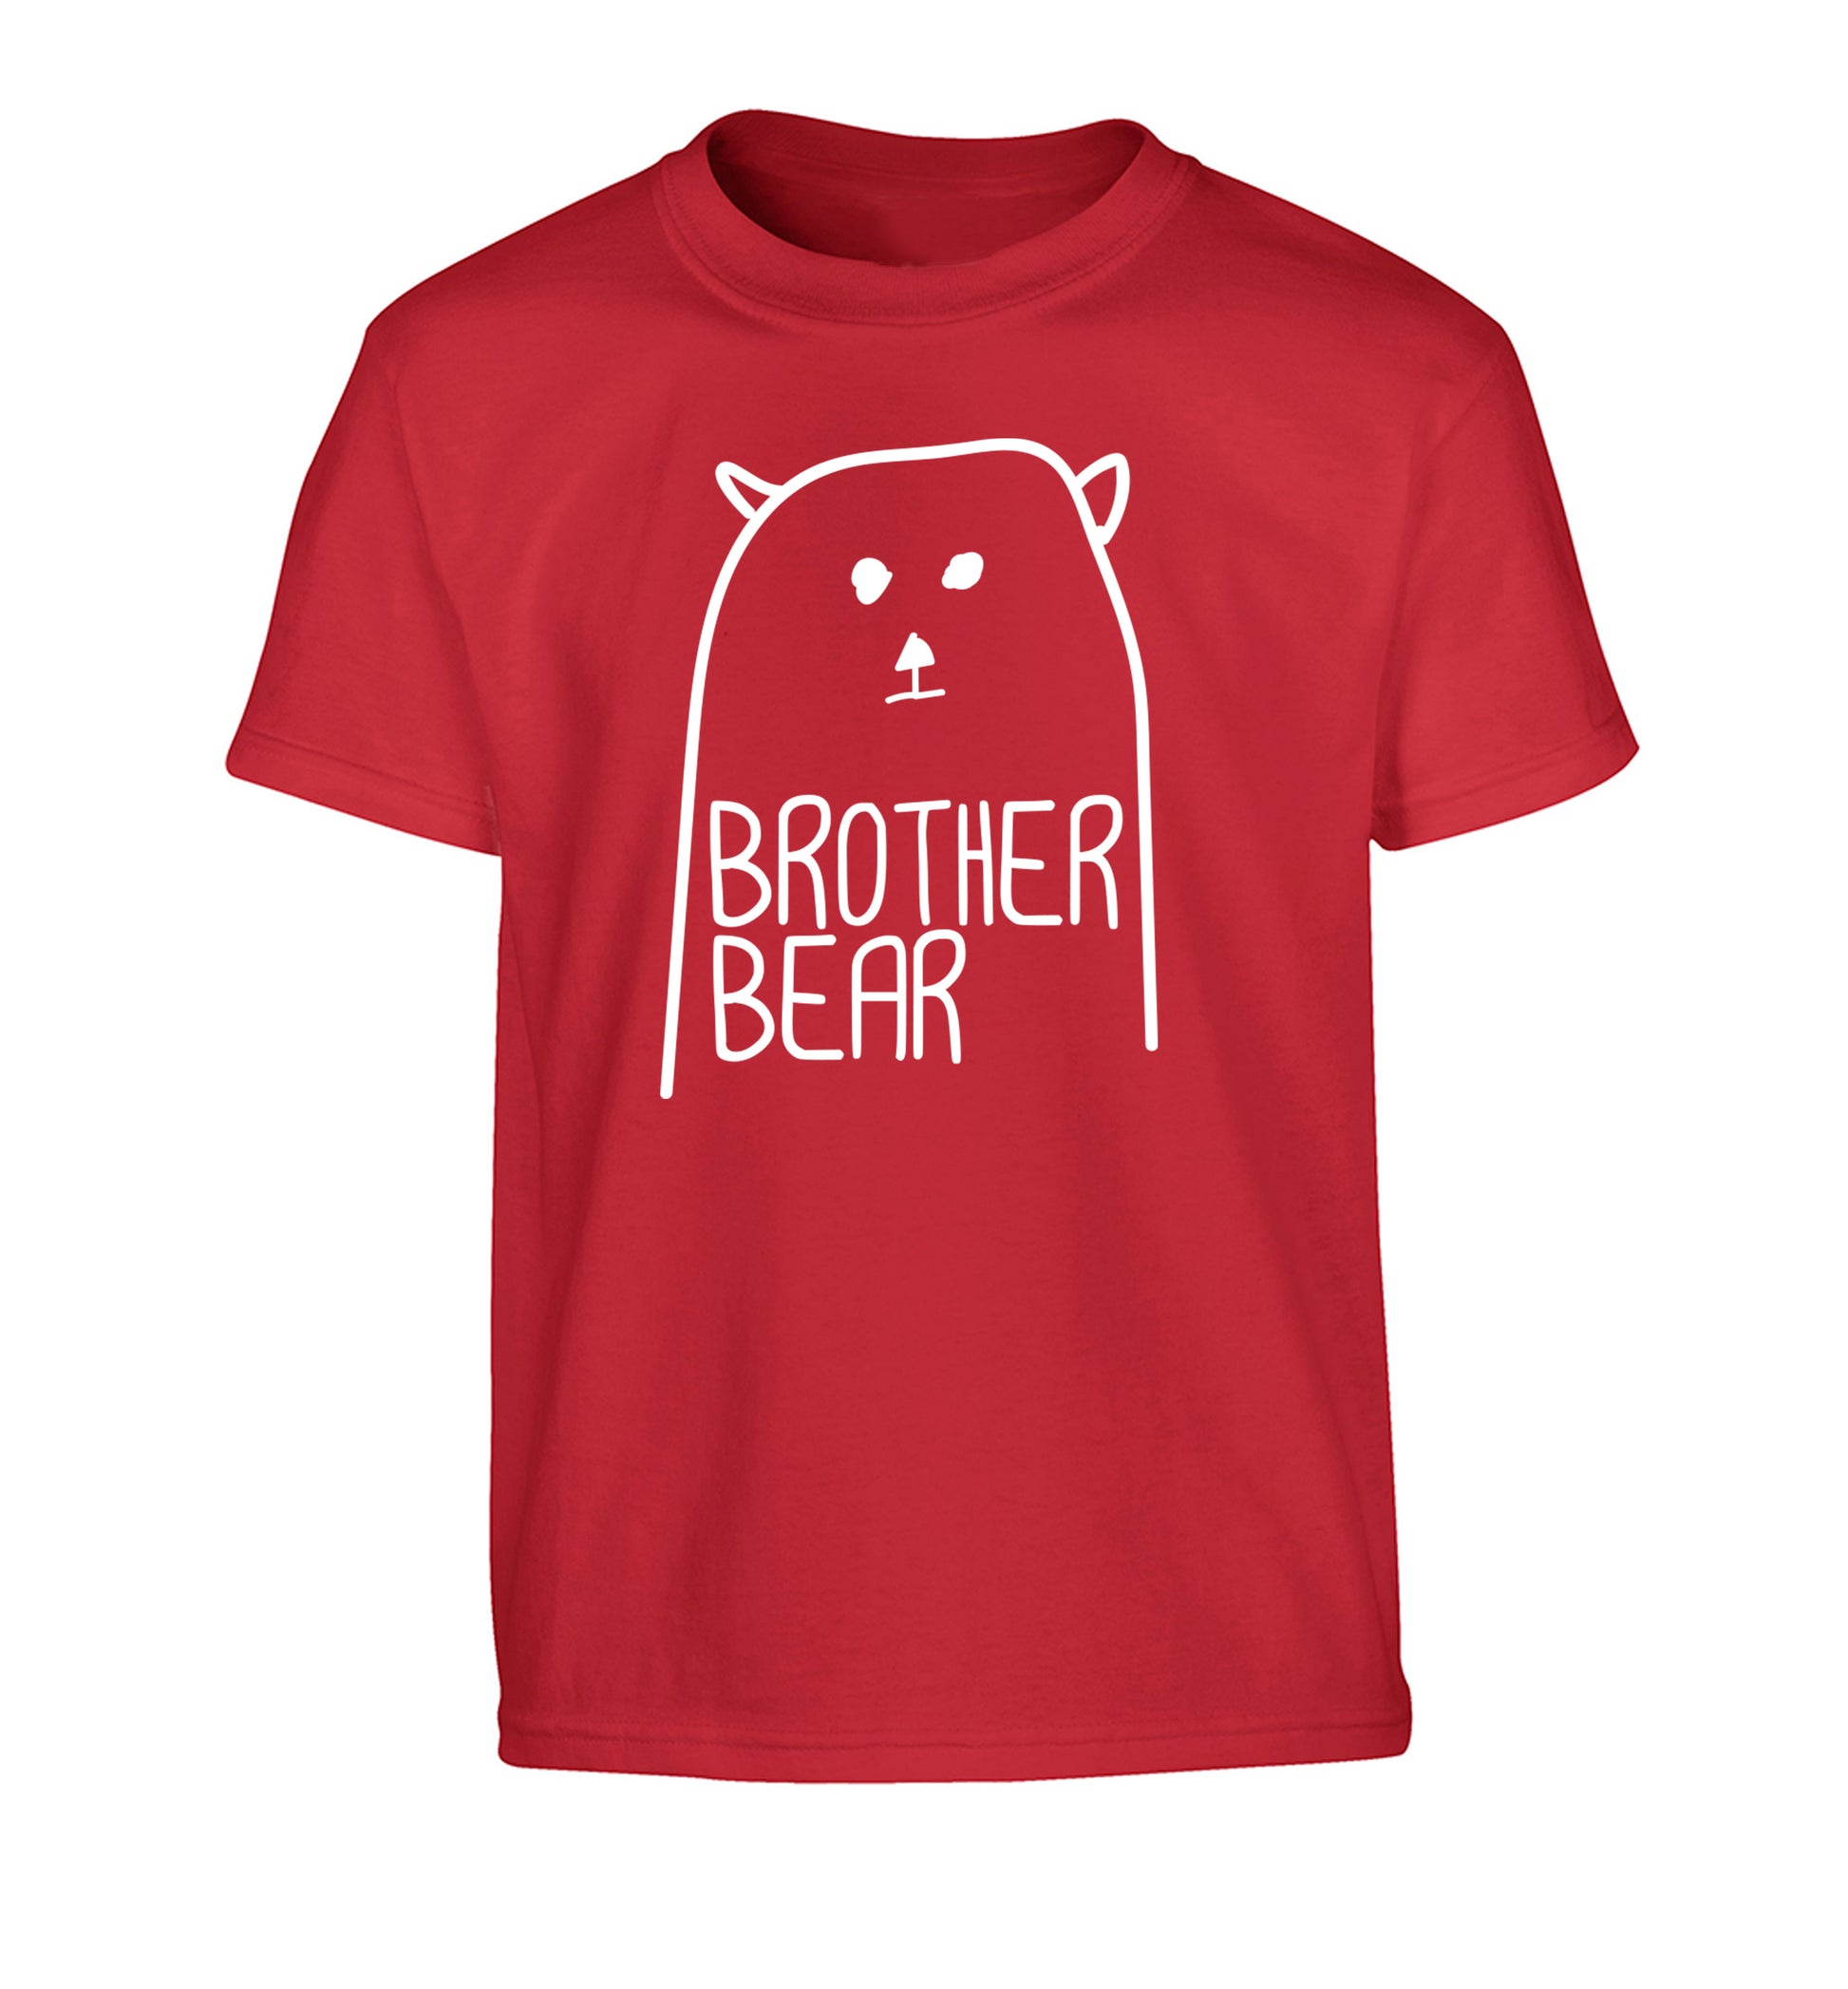 Brother bear Children's red Tshirt 12-13 Years